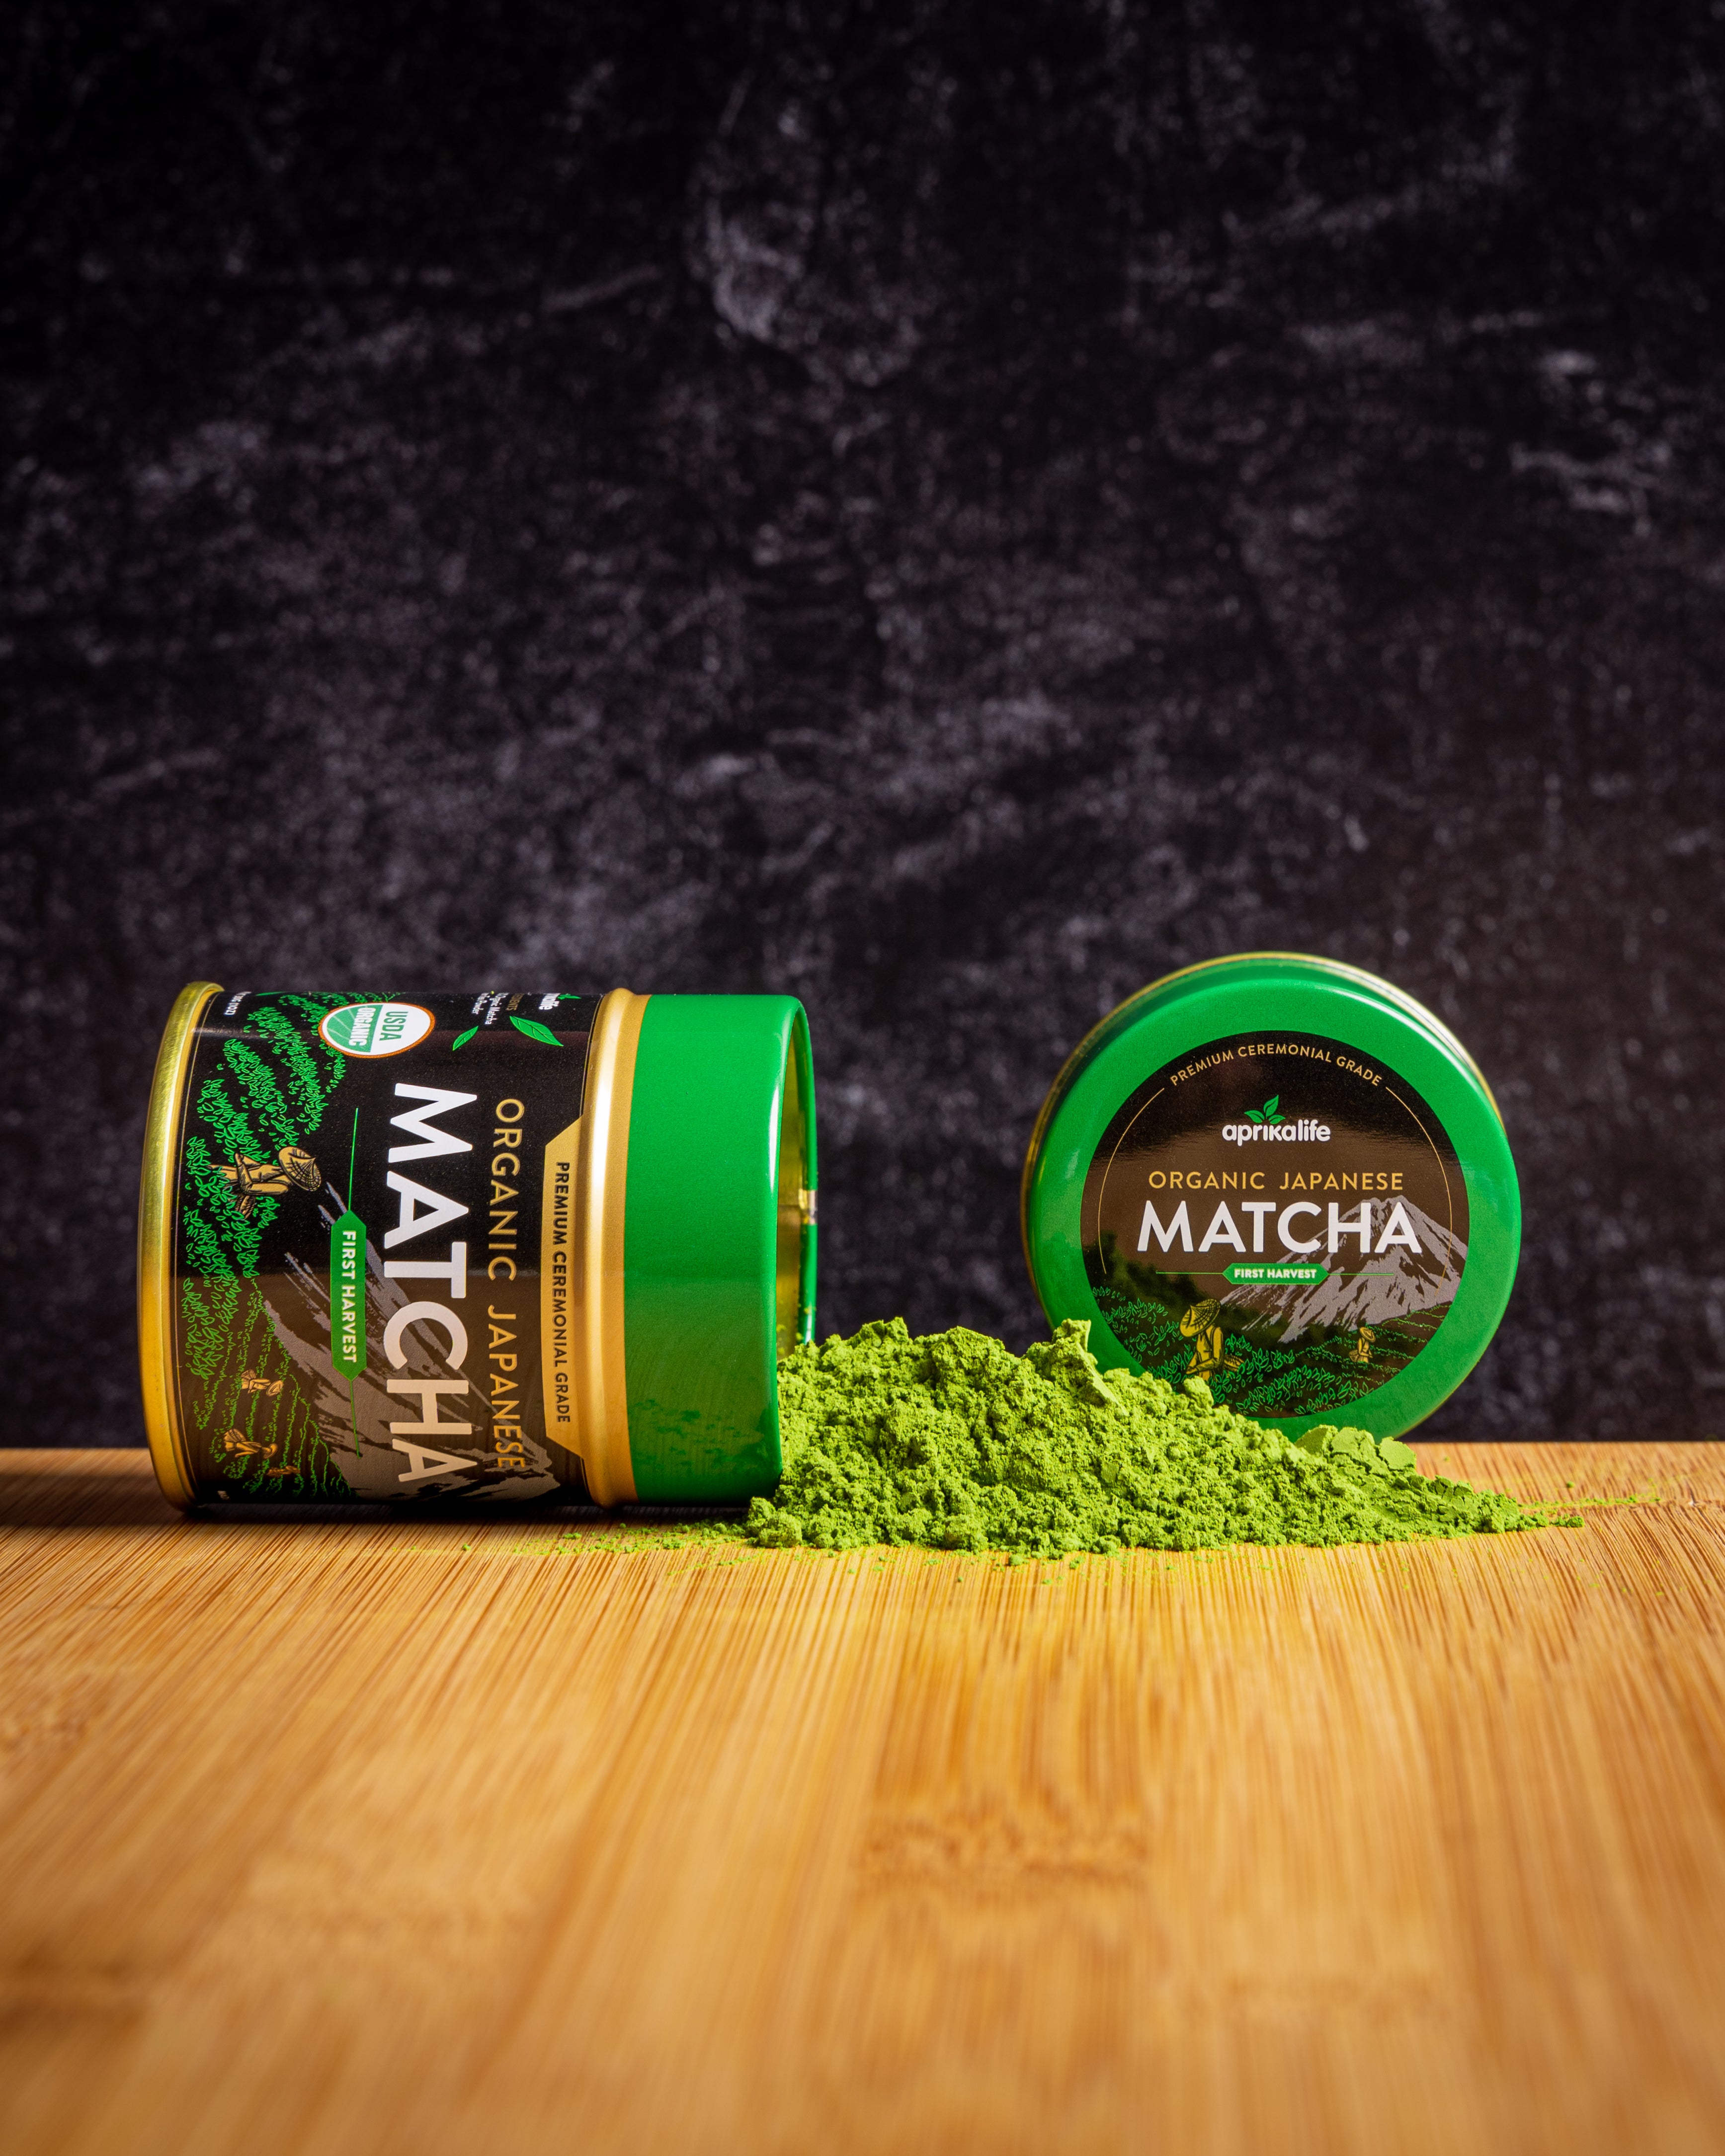 GMA Ceremonial Grade Matcha Green Tea Powder 4.92 oz ceremonial matcha  powder, Non GMO, Vegan Friendly, Gluten Free For direct brewing and  drinking 